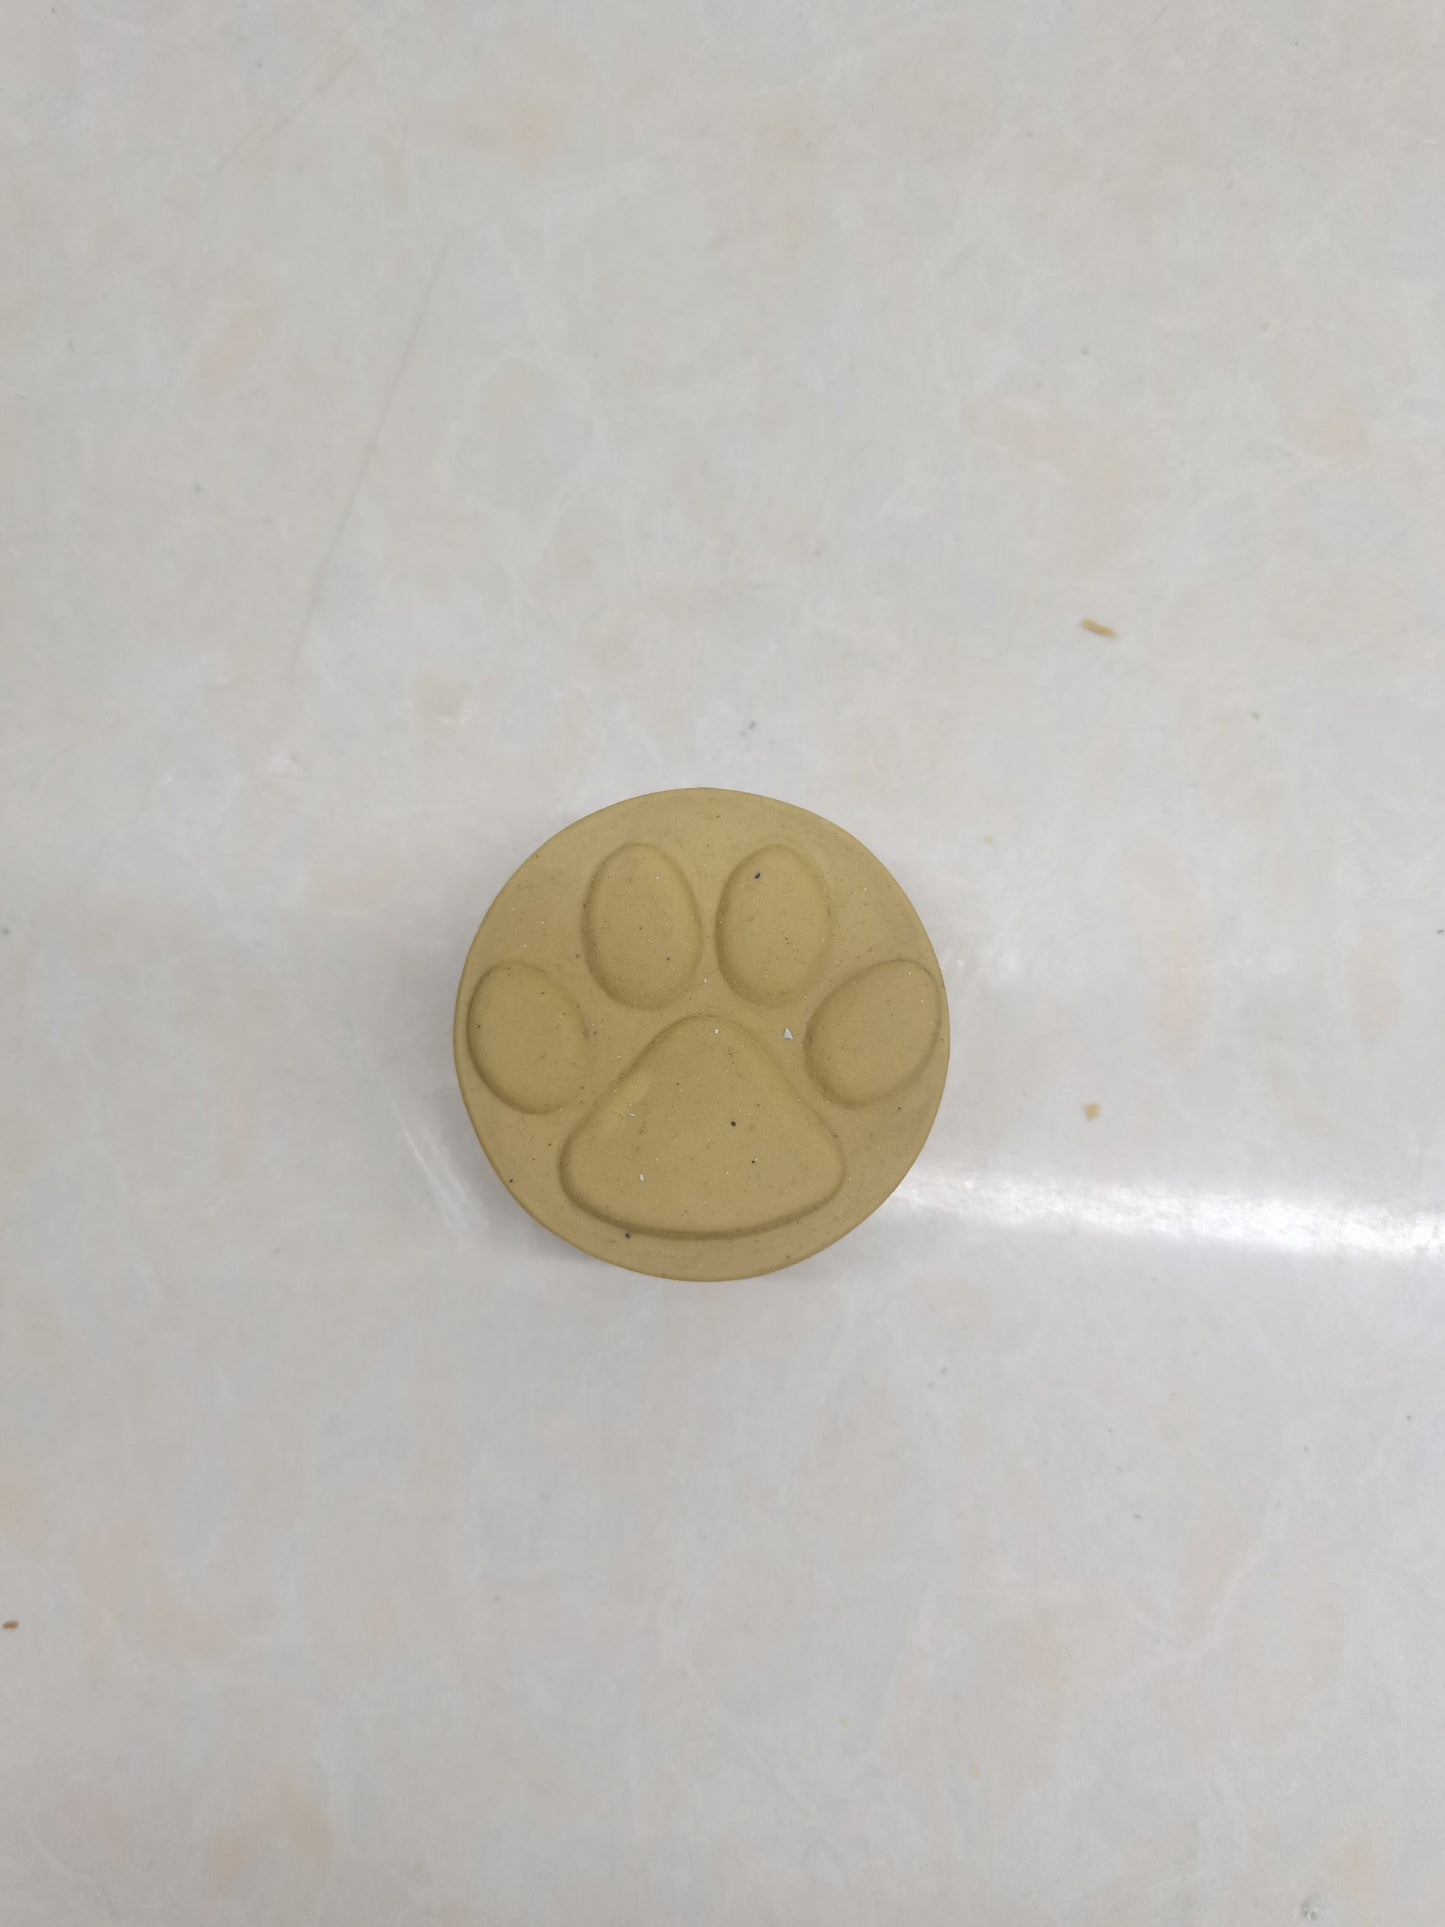 [Earlybird Price] 2 Dog Paw Print Porcelain Toilet Bolt Covers